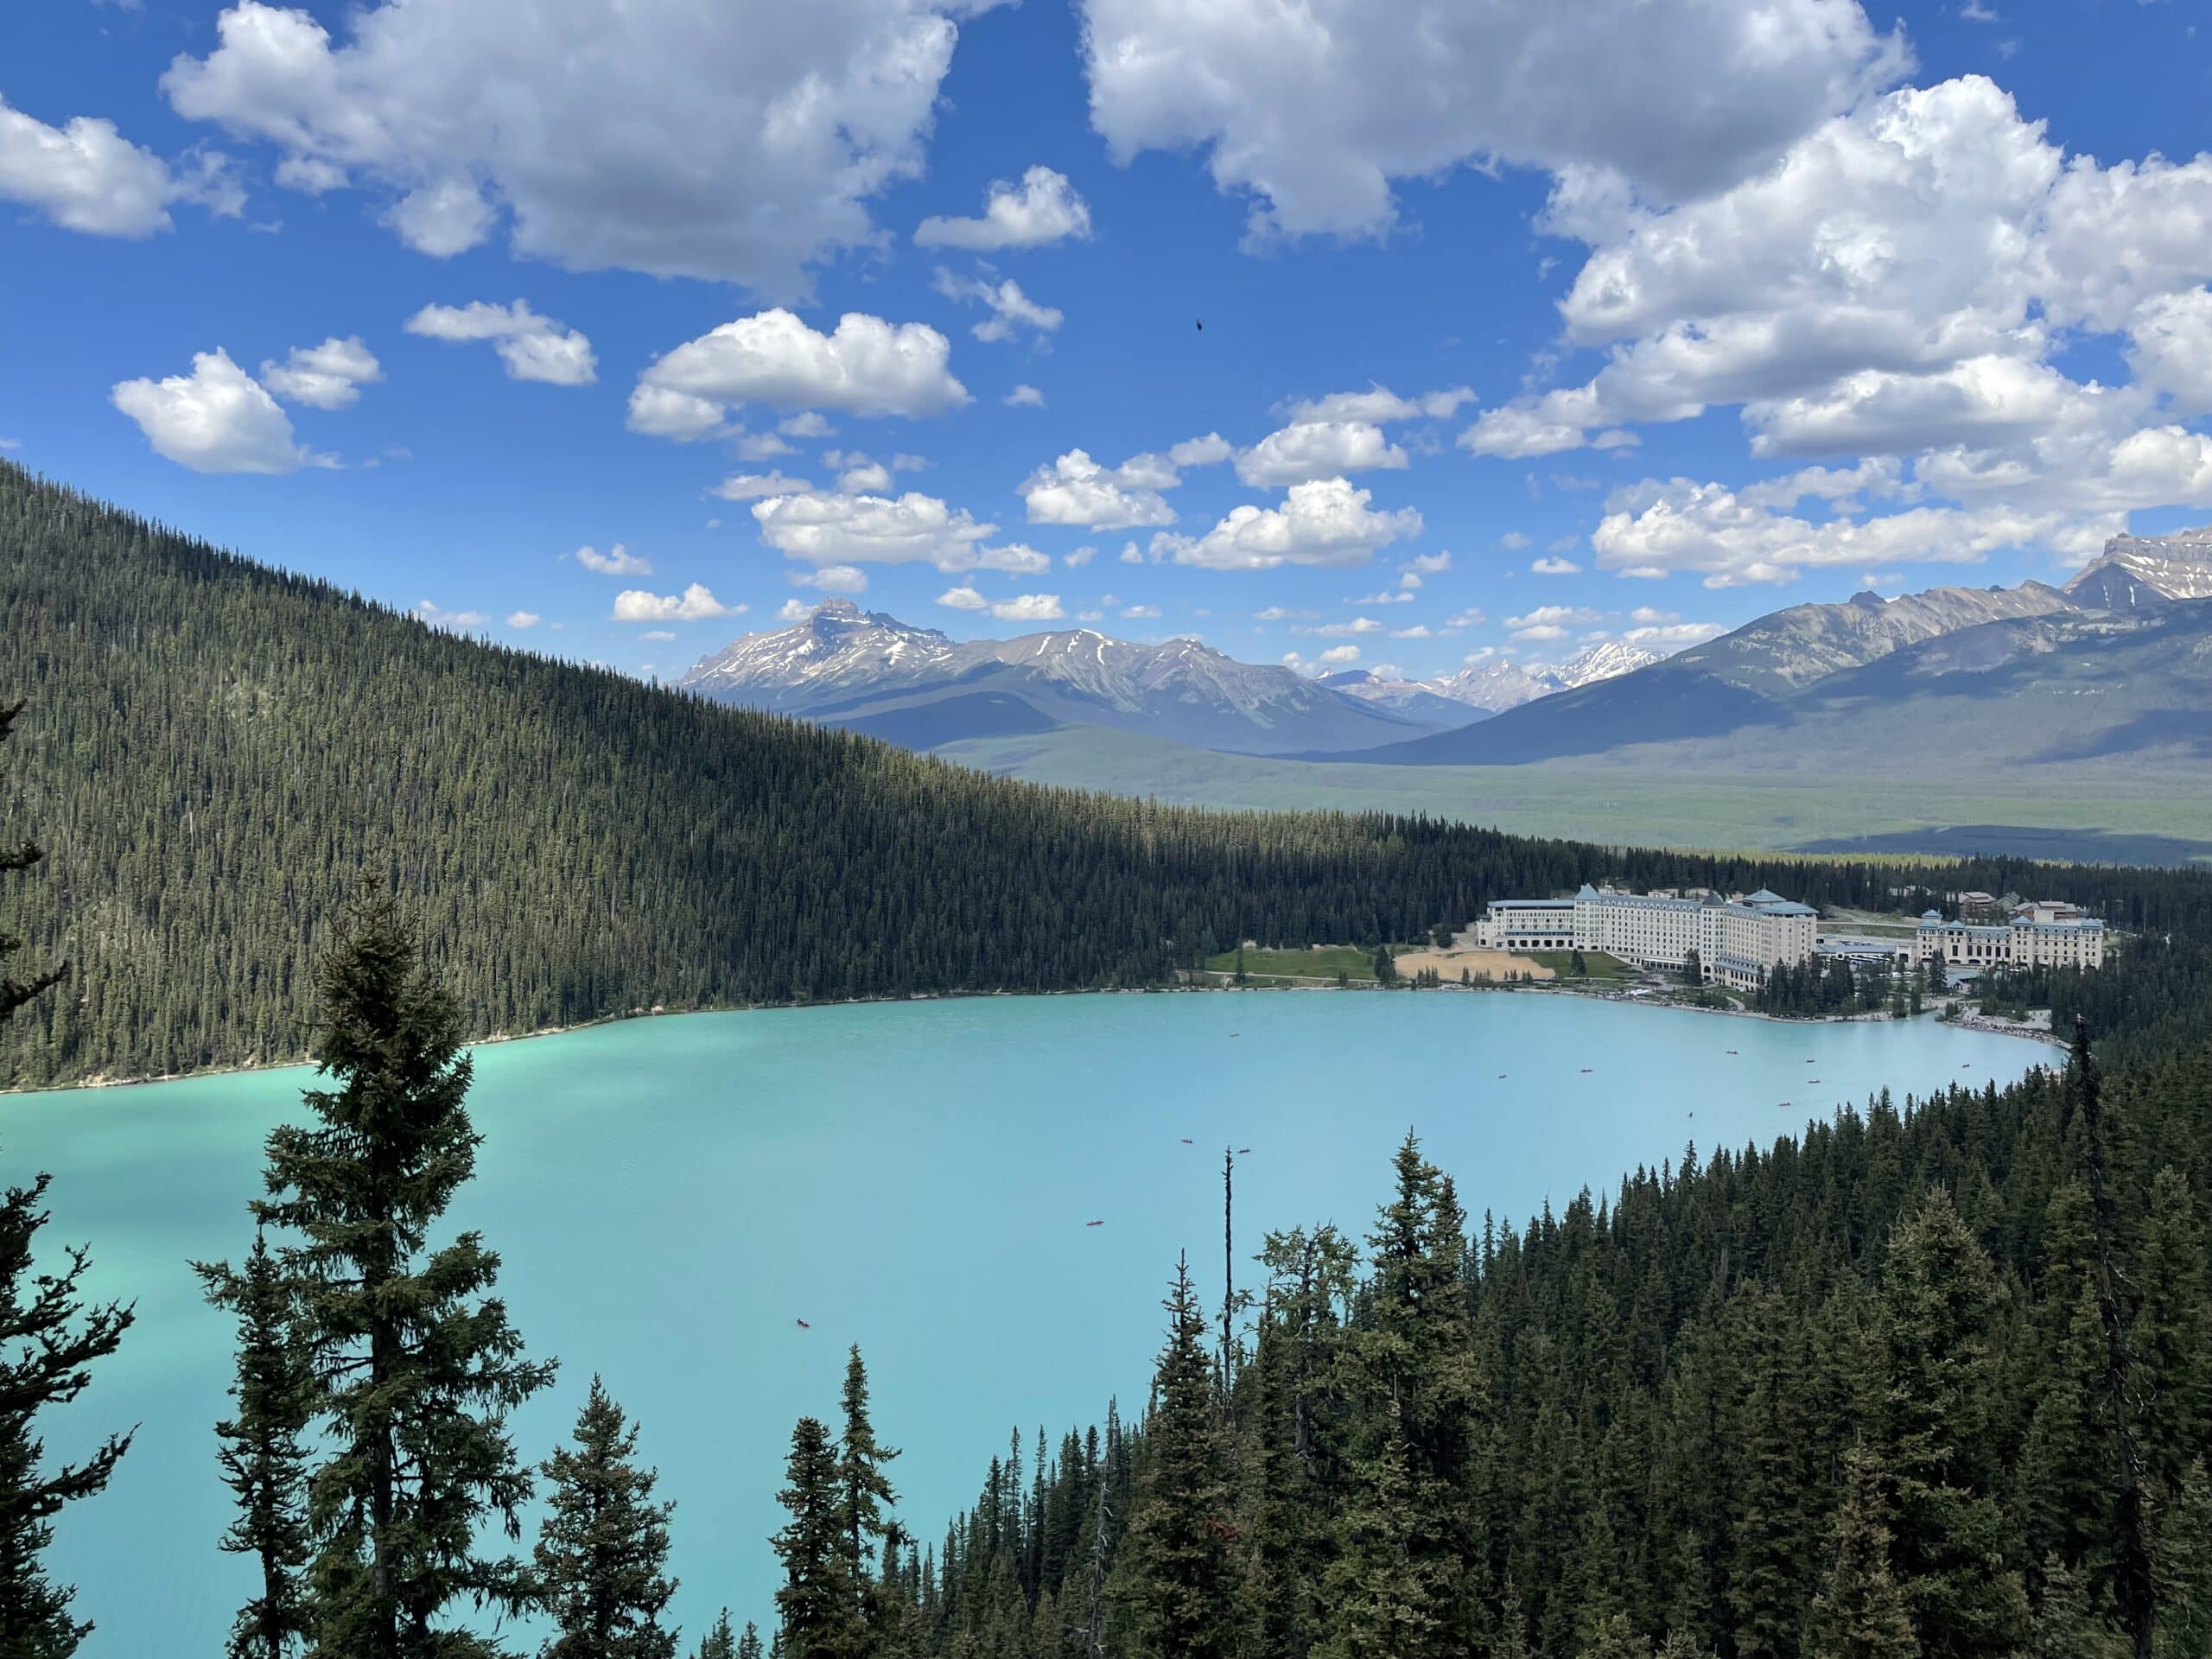 https://www.discovercanadatours.com/wp-content/uploads/2023/05/LakeLouise2-scaled.jpg